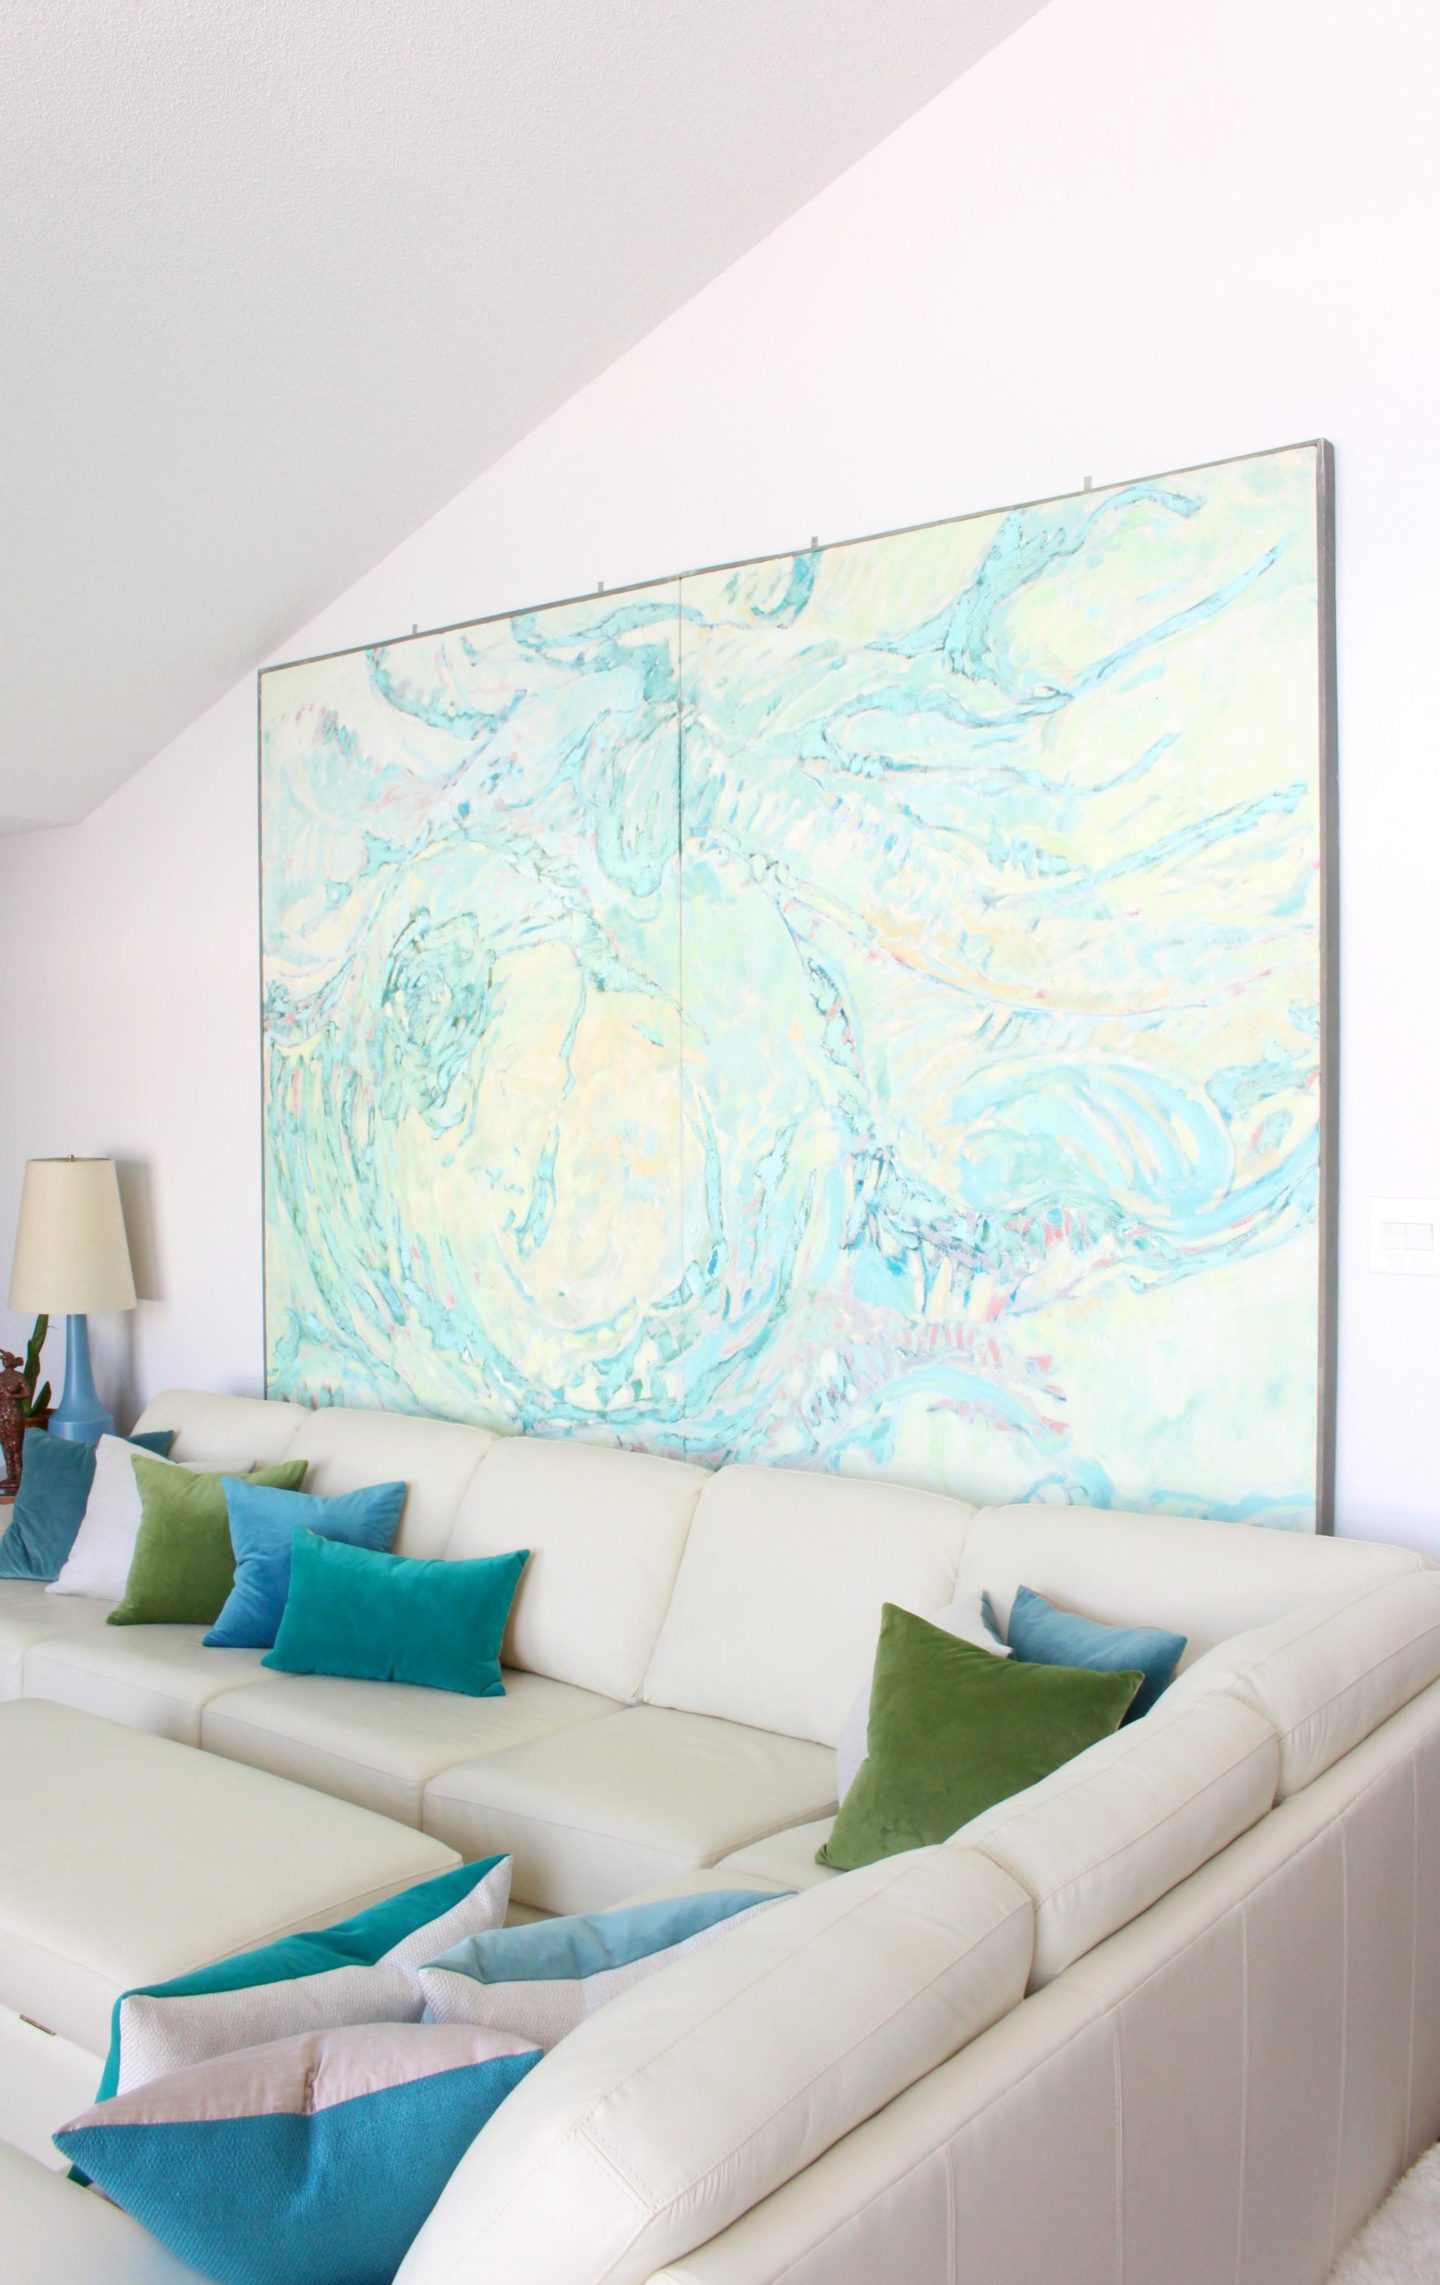 How to Hang Large Art + How to Put a Sofa in Front of Art Without Causing Damage